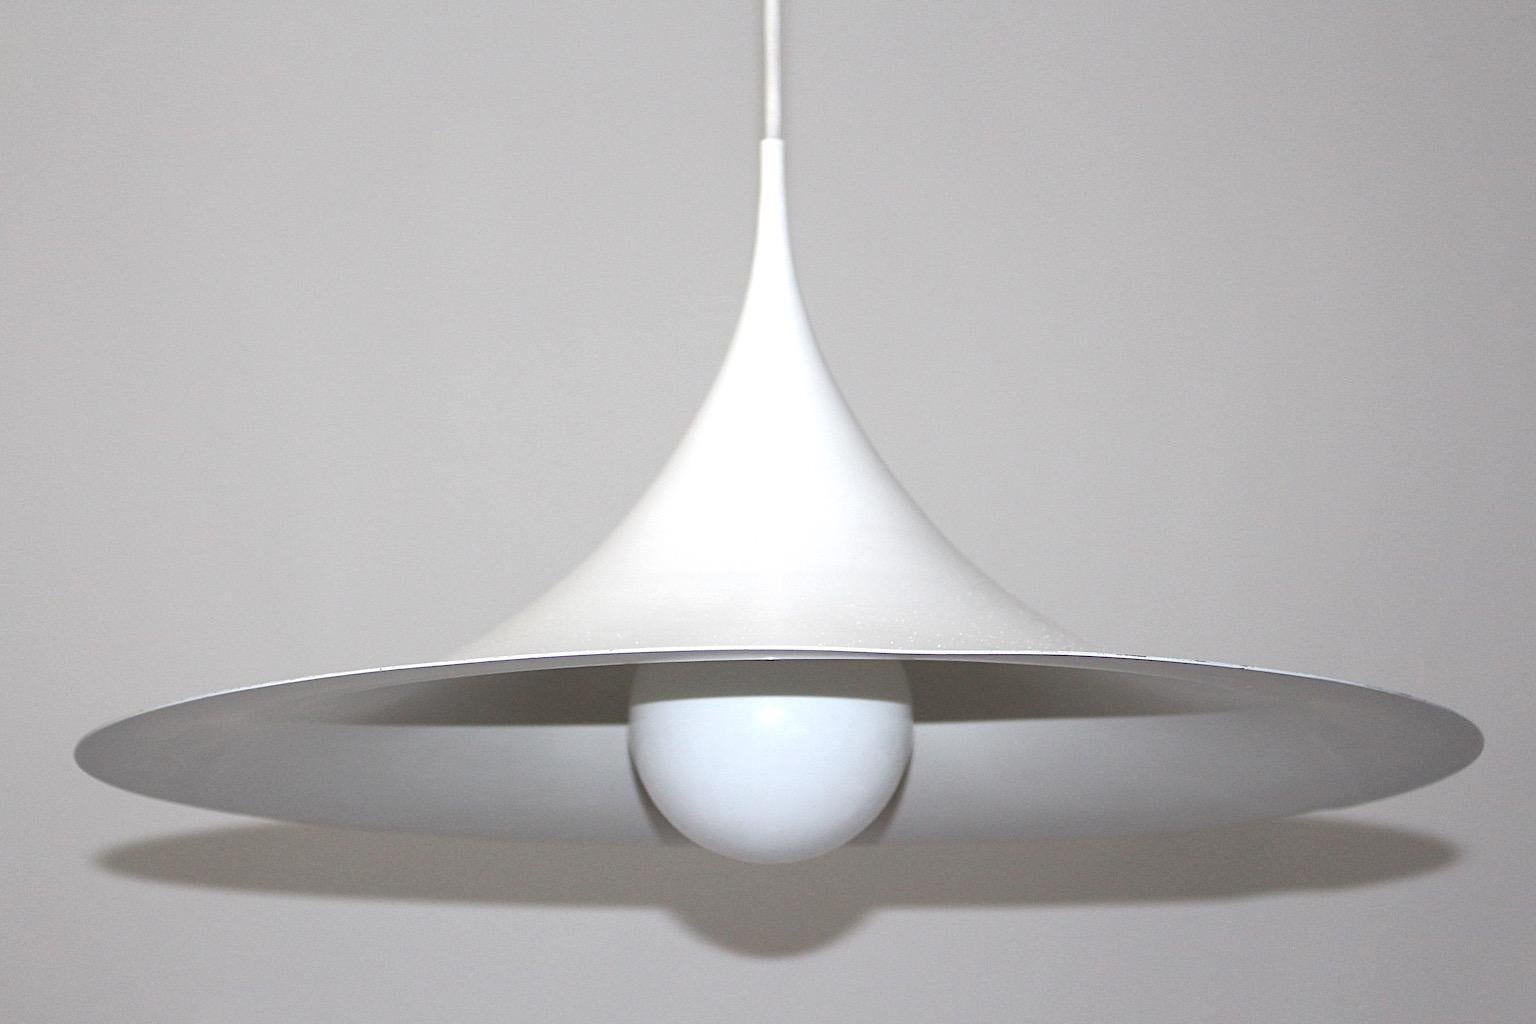 Scandinavian Modern vintage Semi chandelier or pendant from white enameled metal attributed to Claus Bonderup & Torsten Thorup 1967 for Fog & Morup.
The chandelier in trumpet form stands out through its timeless form and works very well with